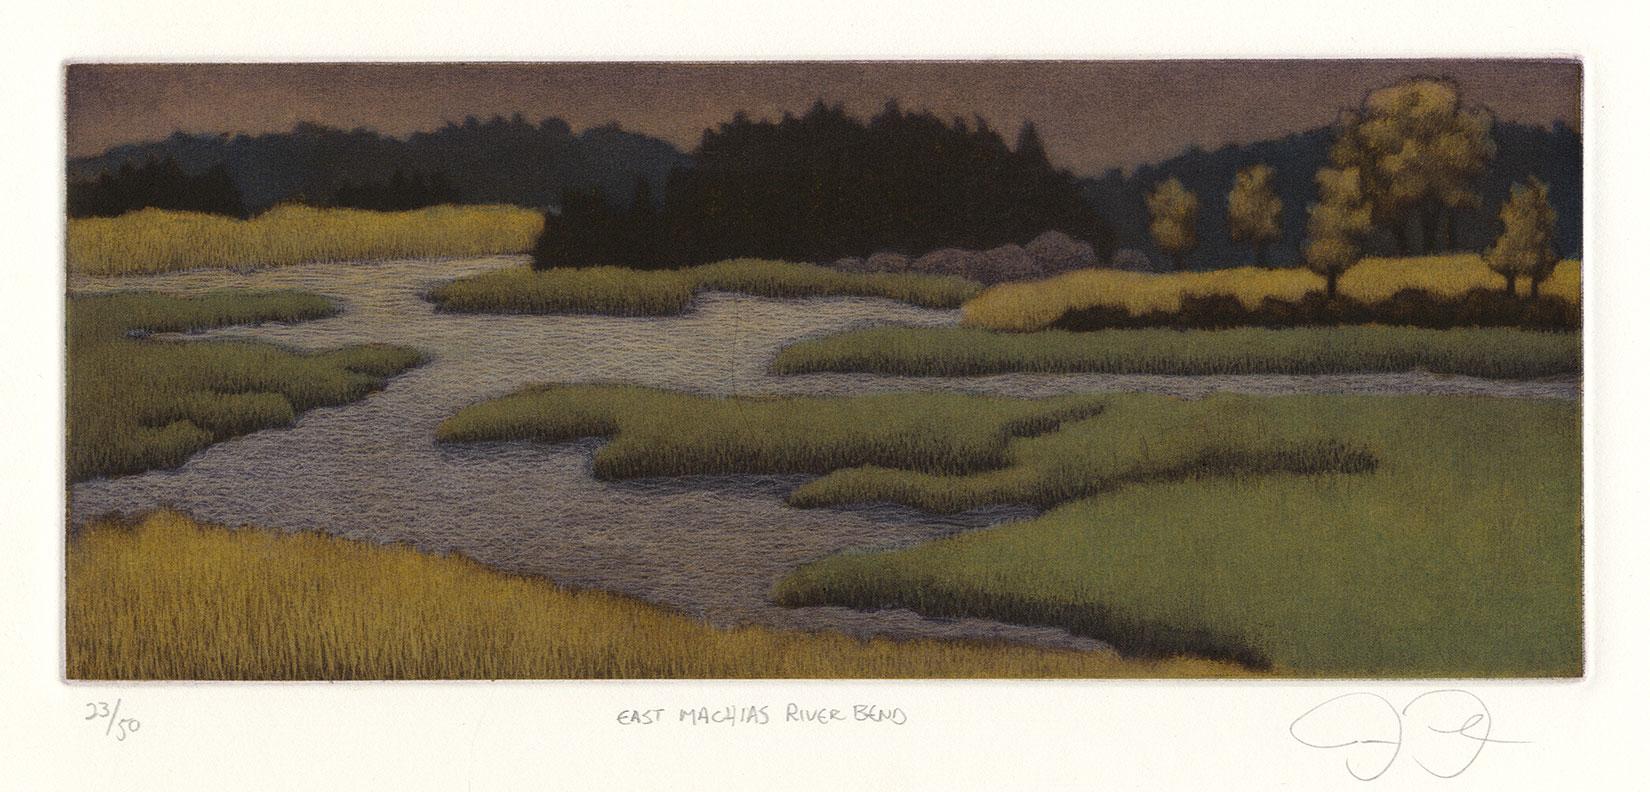 East Machias River Bend (a river in Washington County, Maine) - Contemporary Print by James Groleau